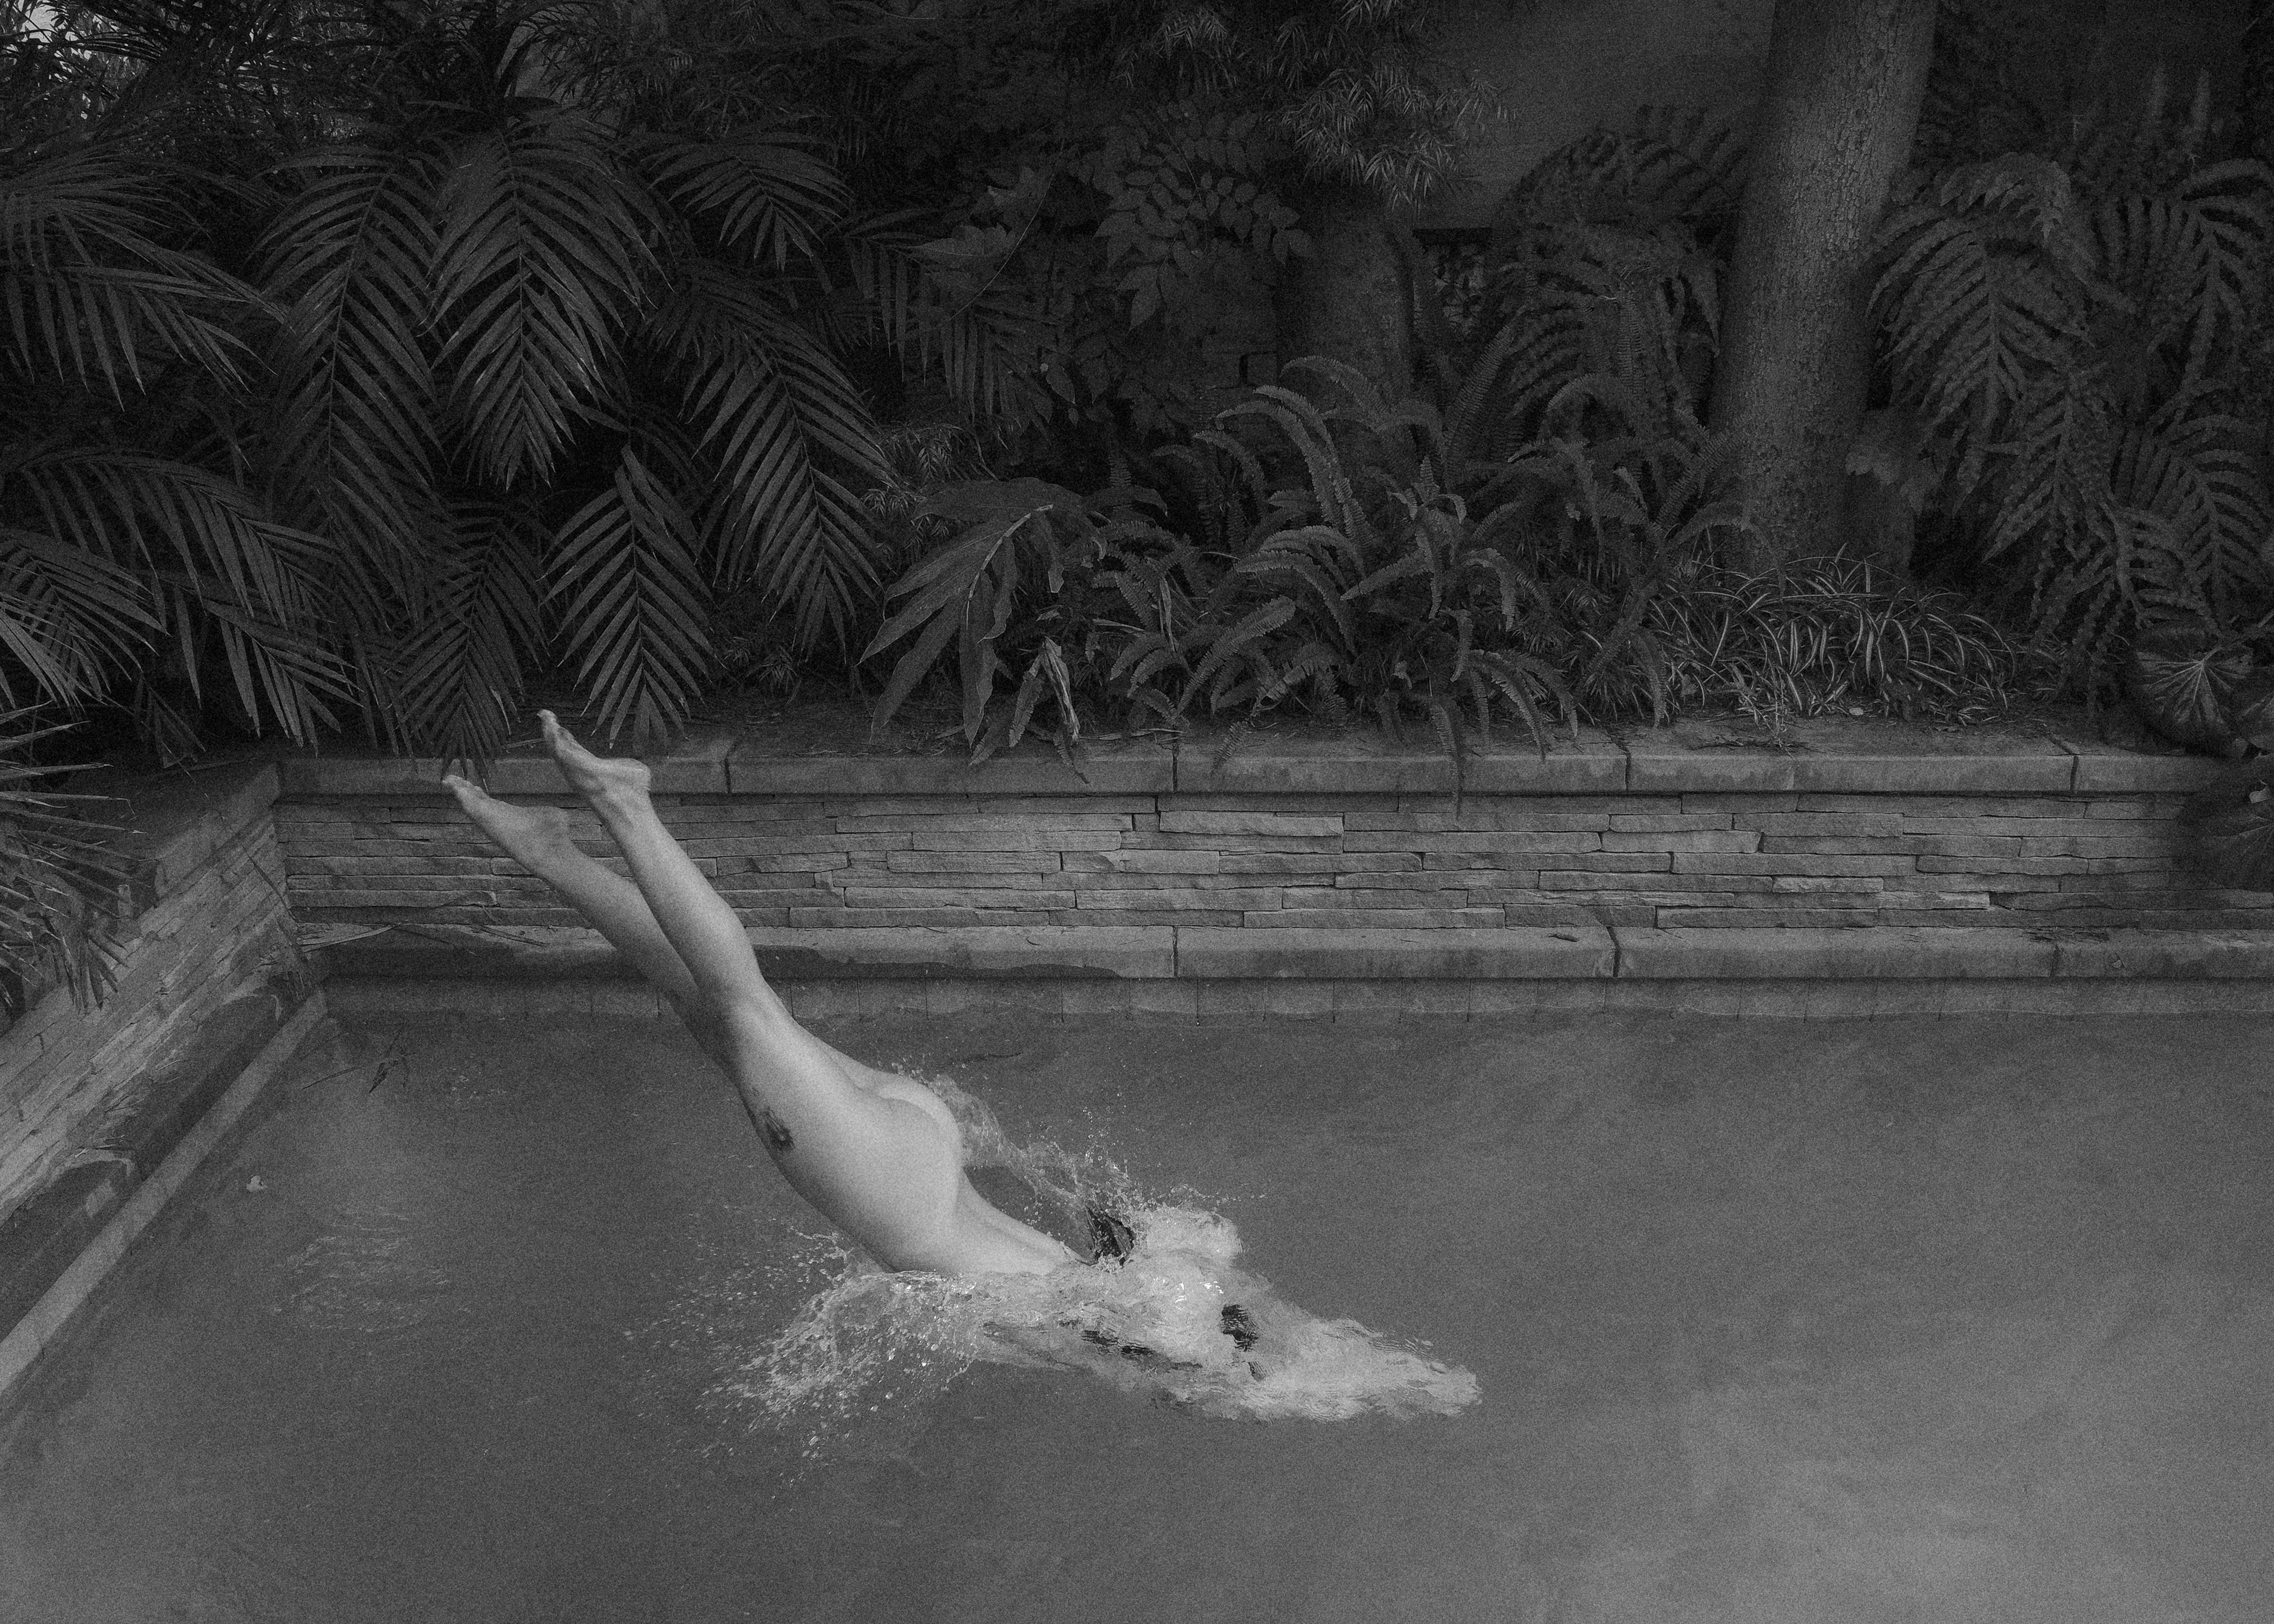 "Dive In" Photography 15.5" x 19.5" in Edition of 15 by Larsen Sotelo